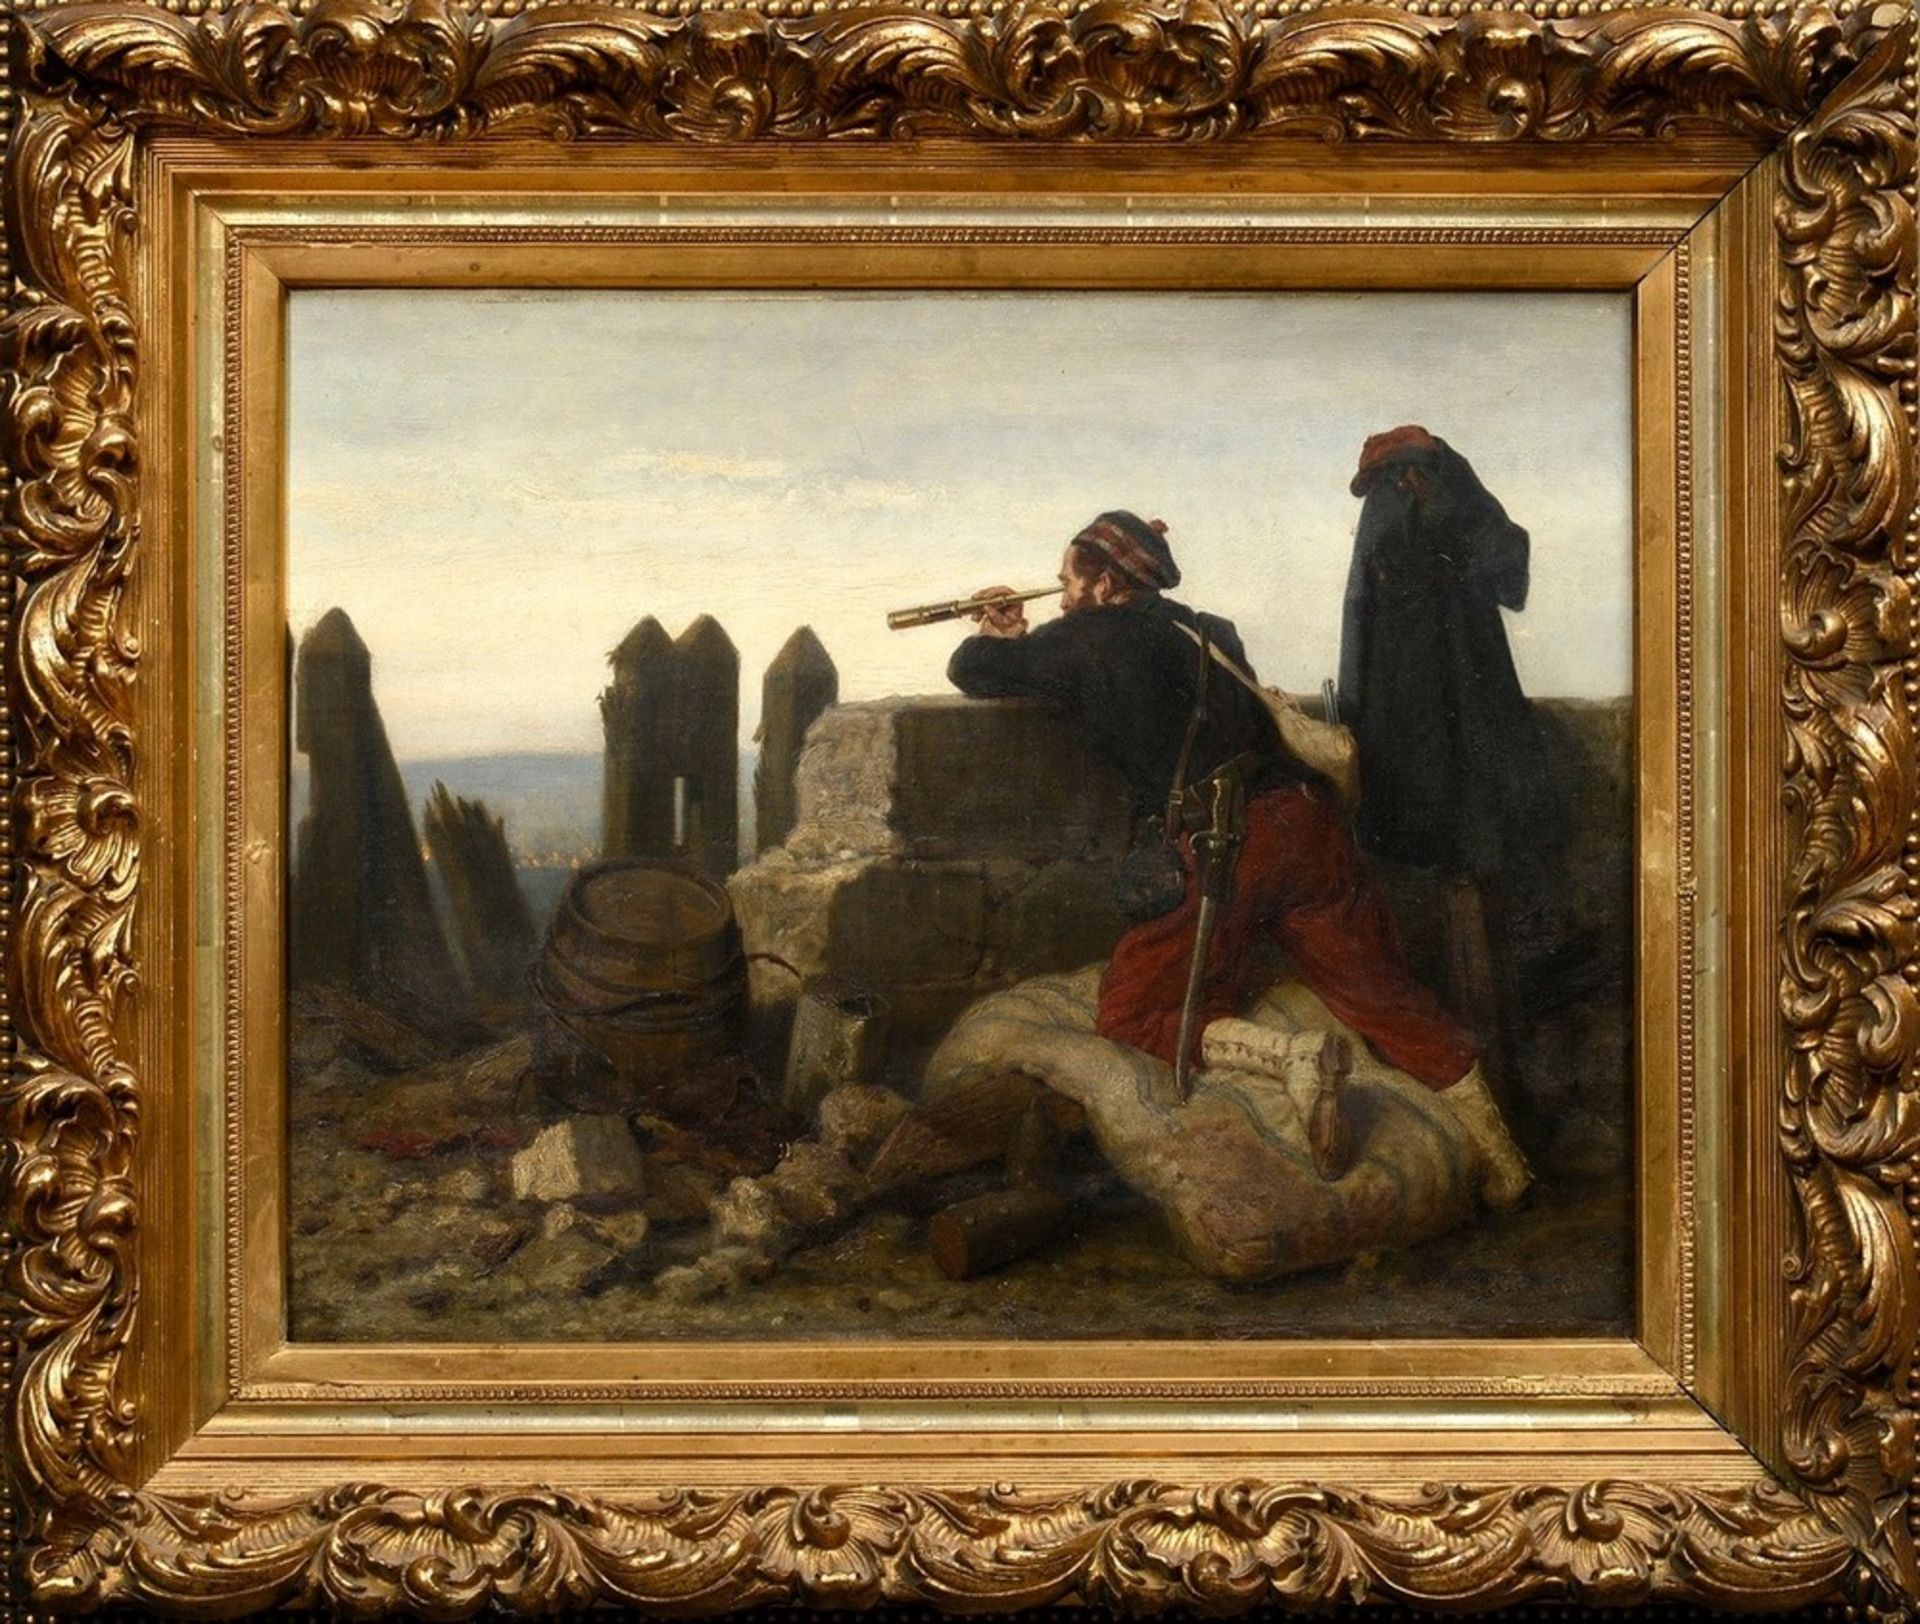 Gillissen, Karl (1842-1885) "Scene from the Franco-Prussian War 1870/71", oil/canvas, sign. b.r., m - Image 2 of 7